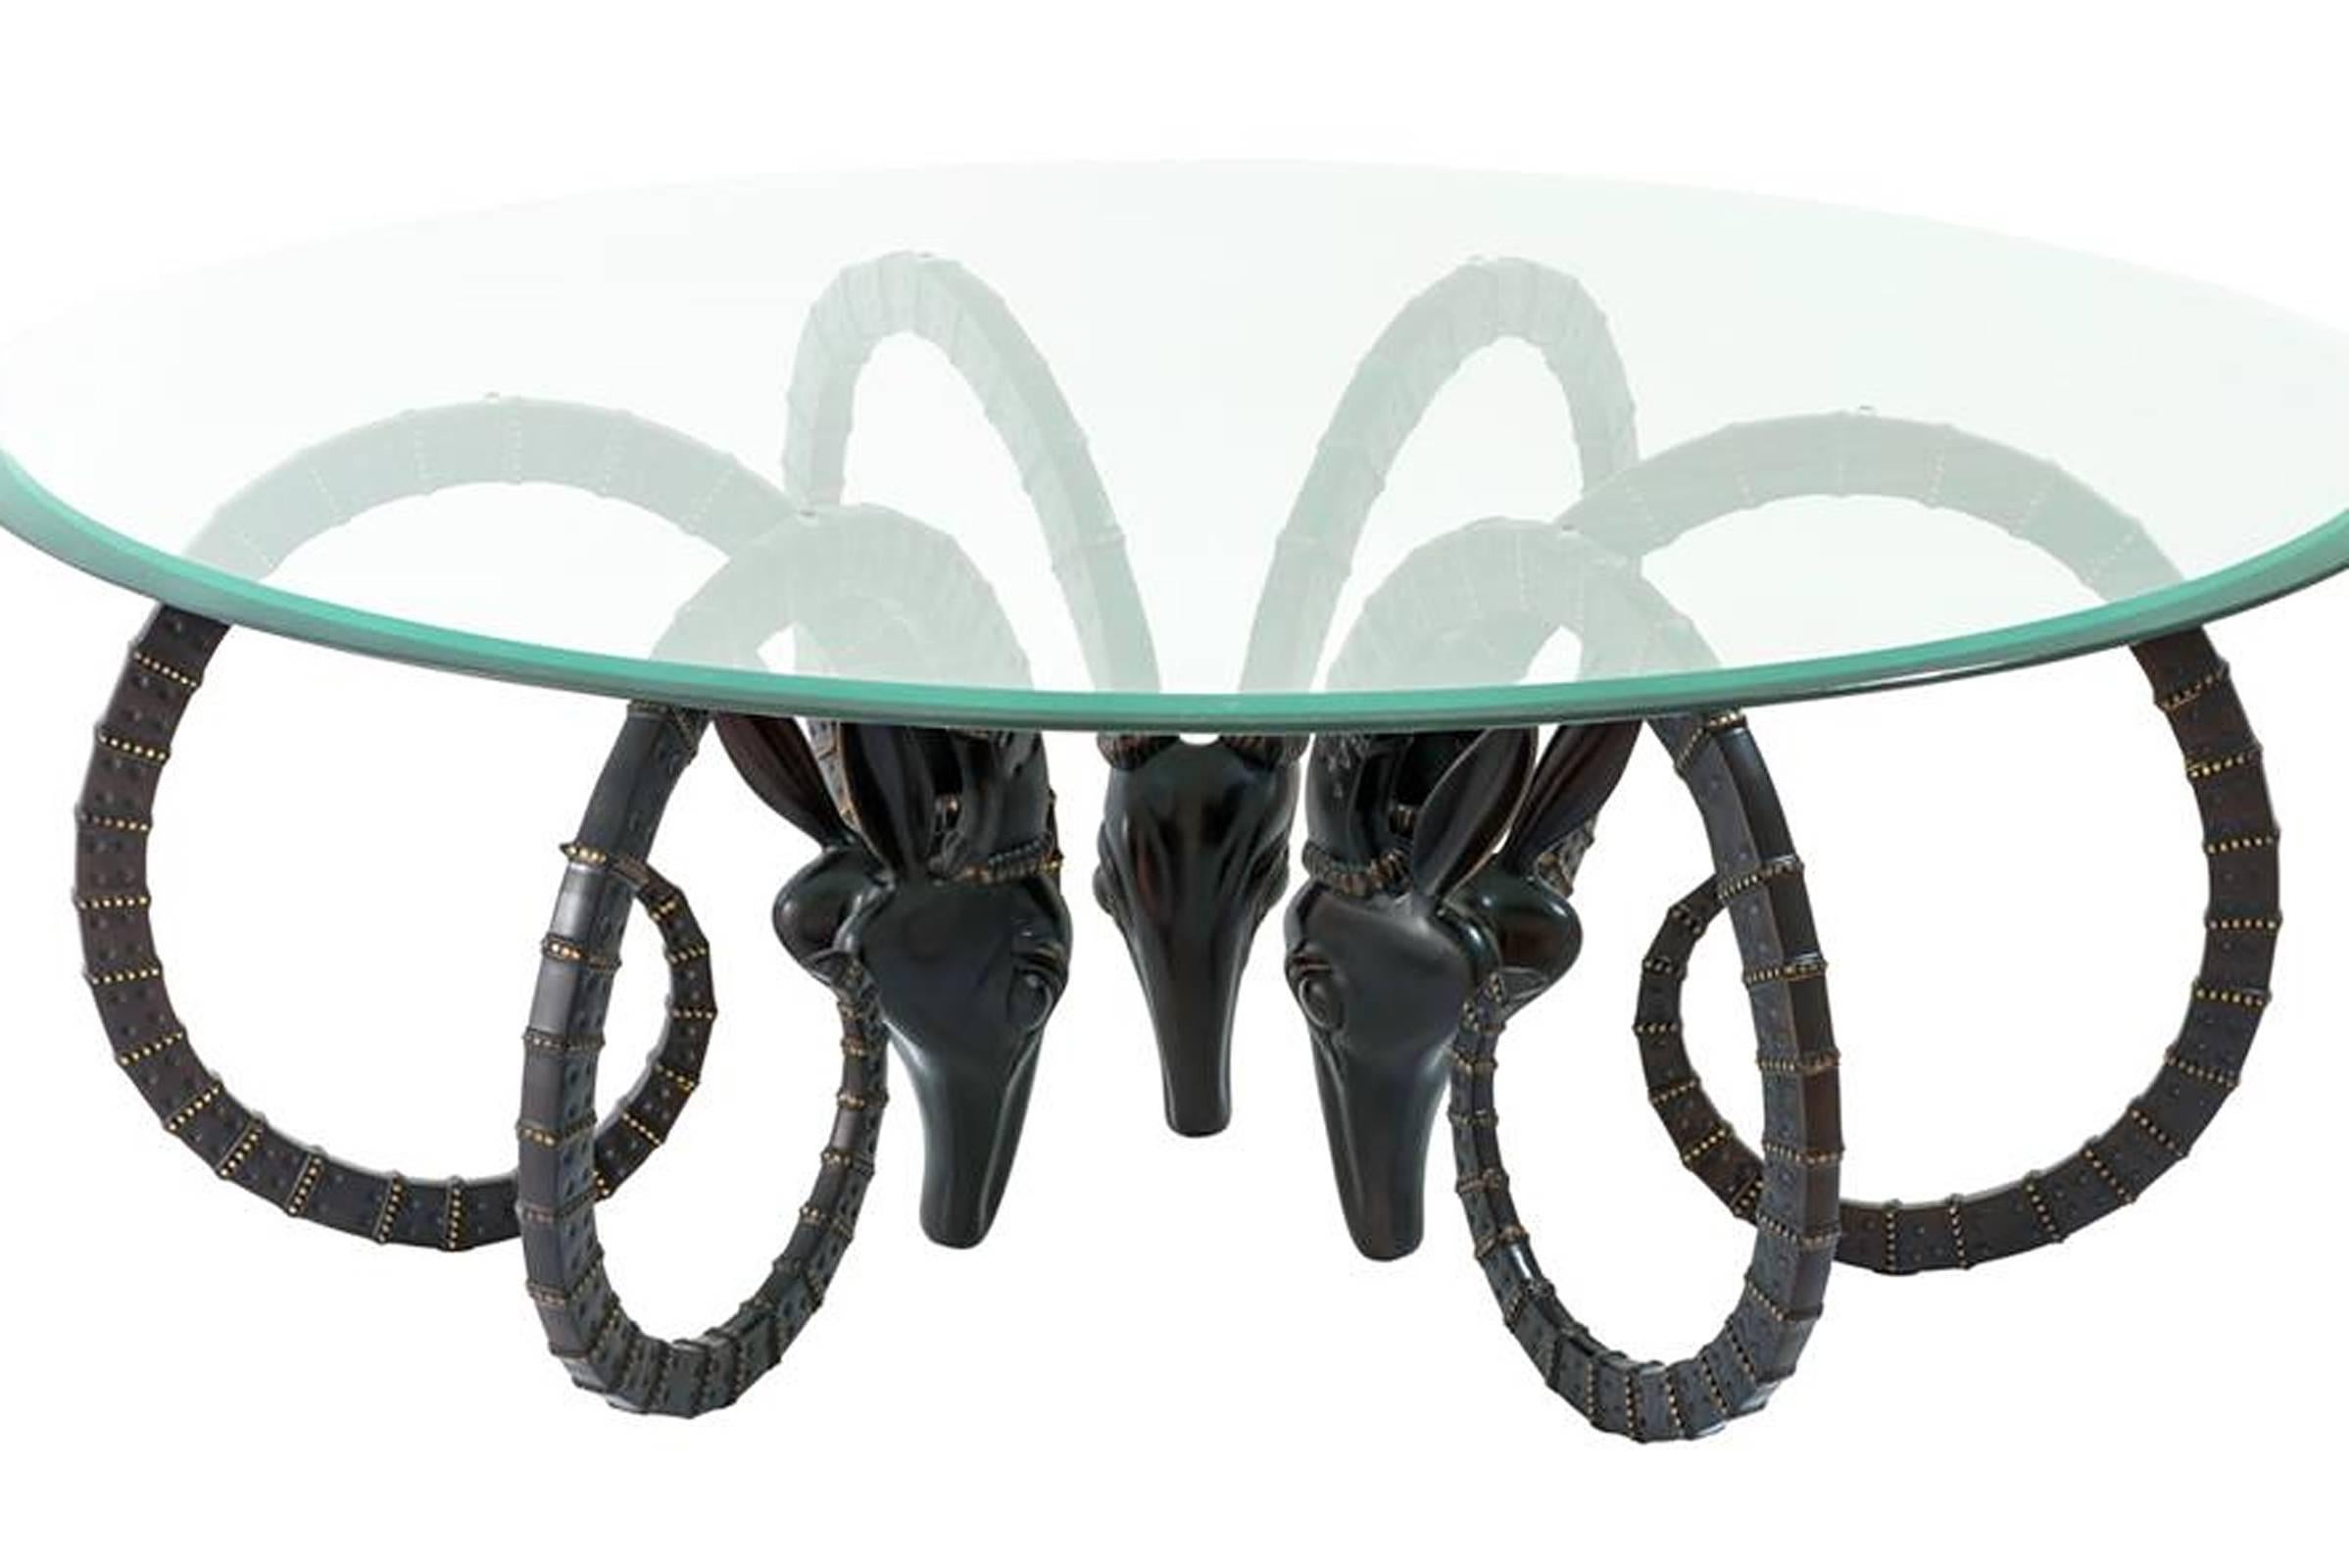 Coffee table Calabra in bronze highlight finish
with bevelled clear glass top.
